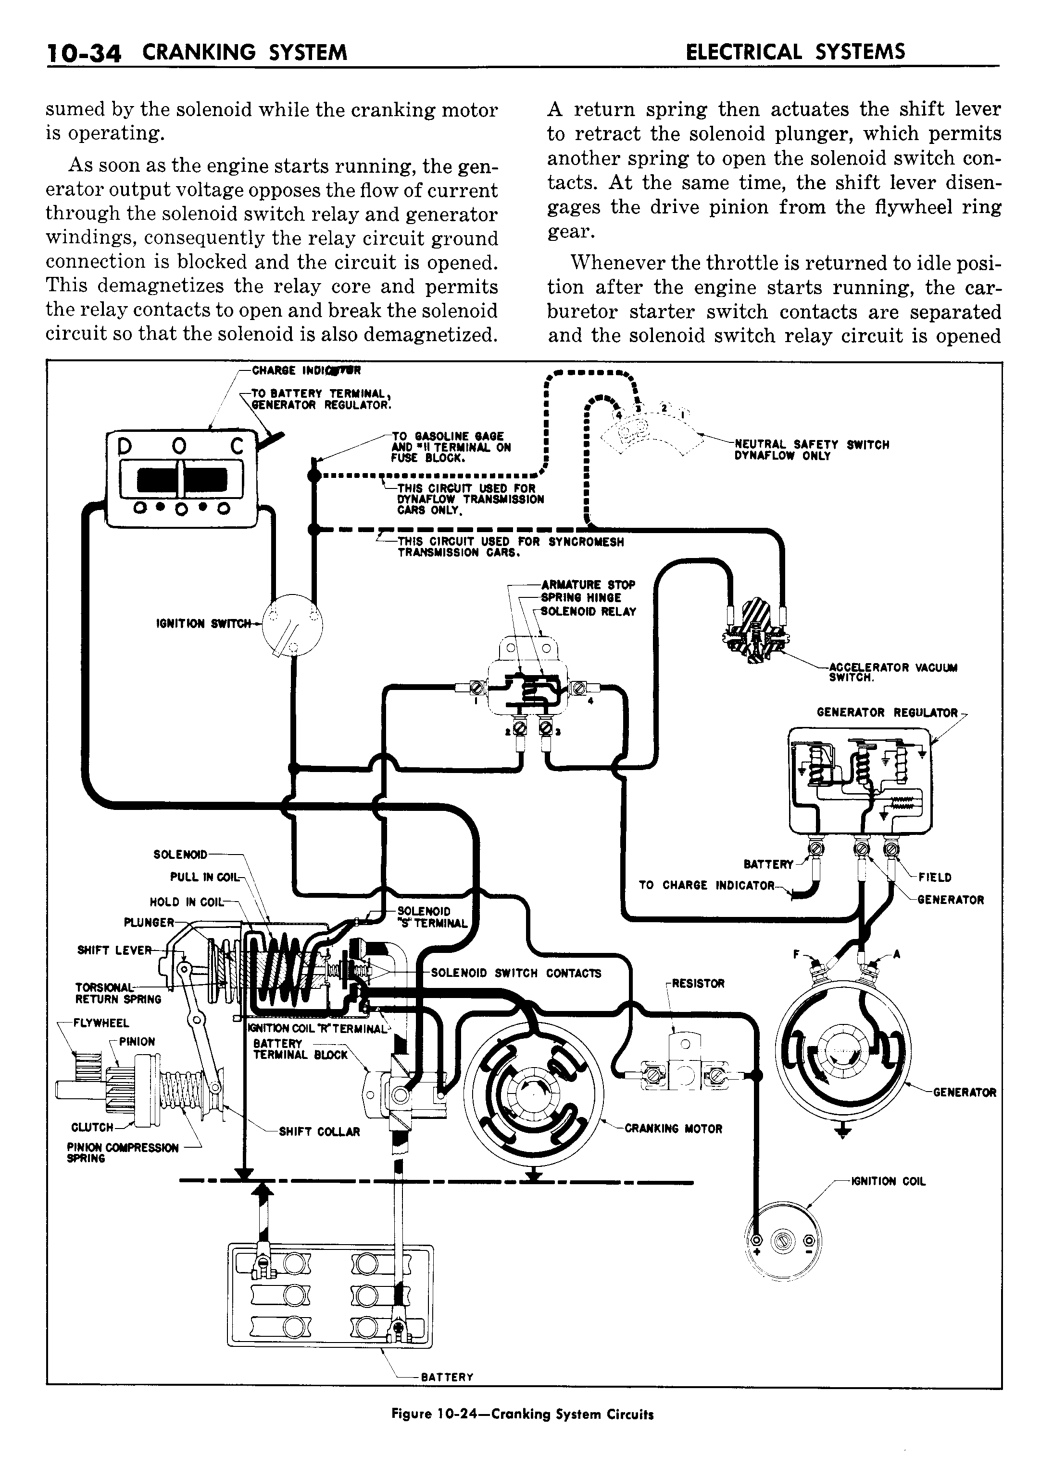 n_11 1957 Buick Shop Manual - Electrical Systems-034-034.jpg